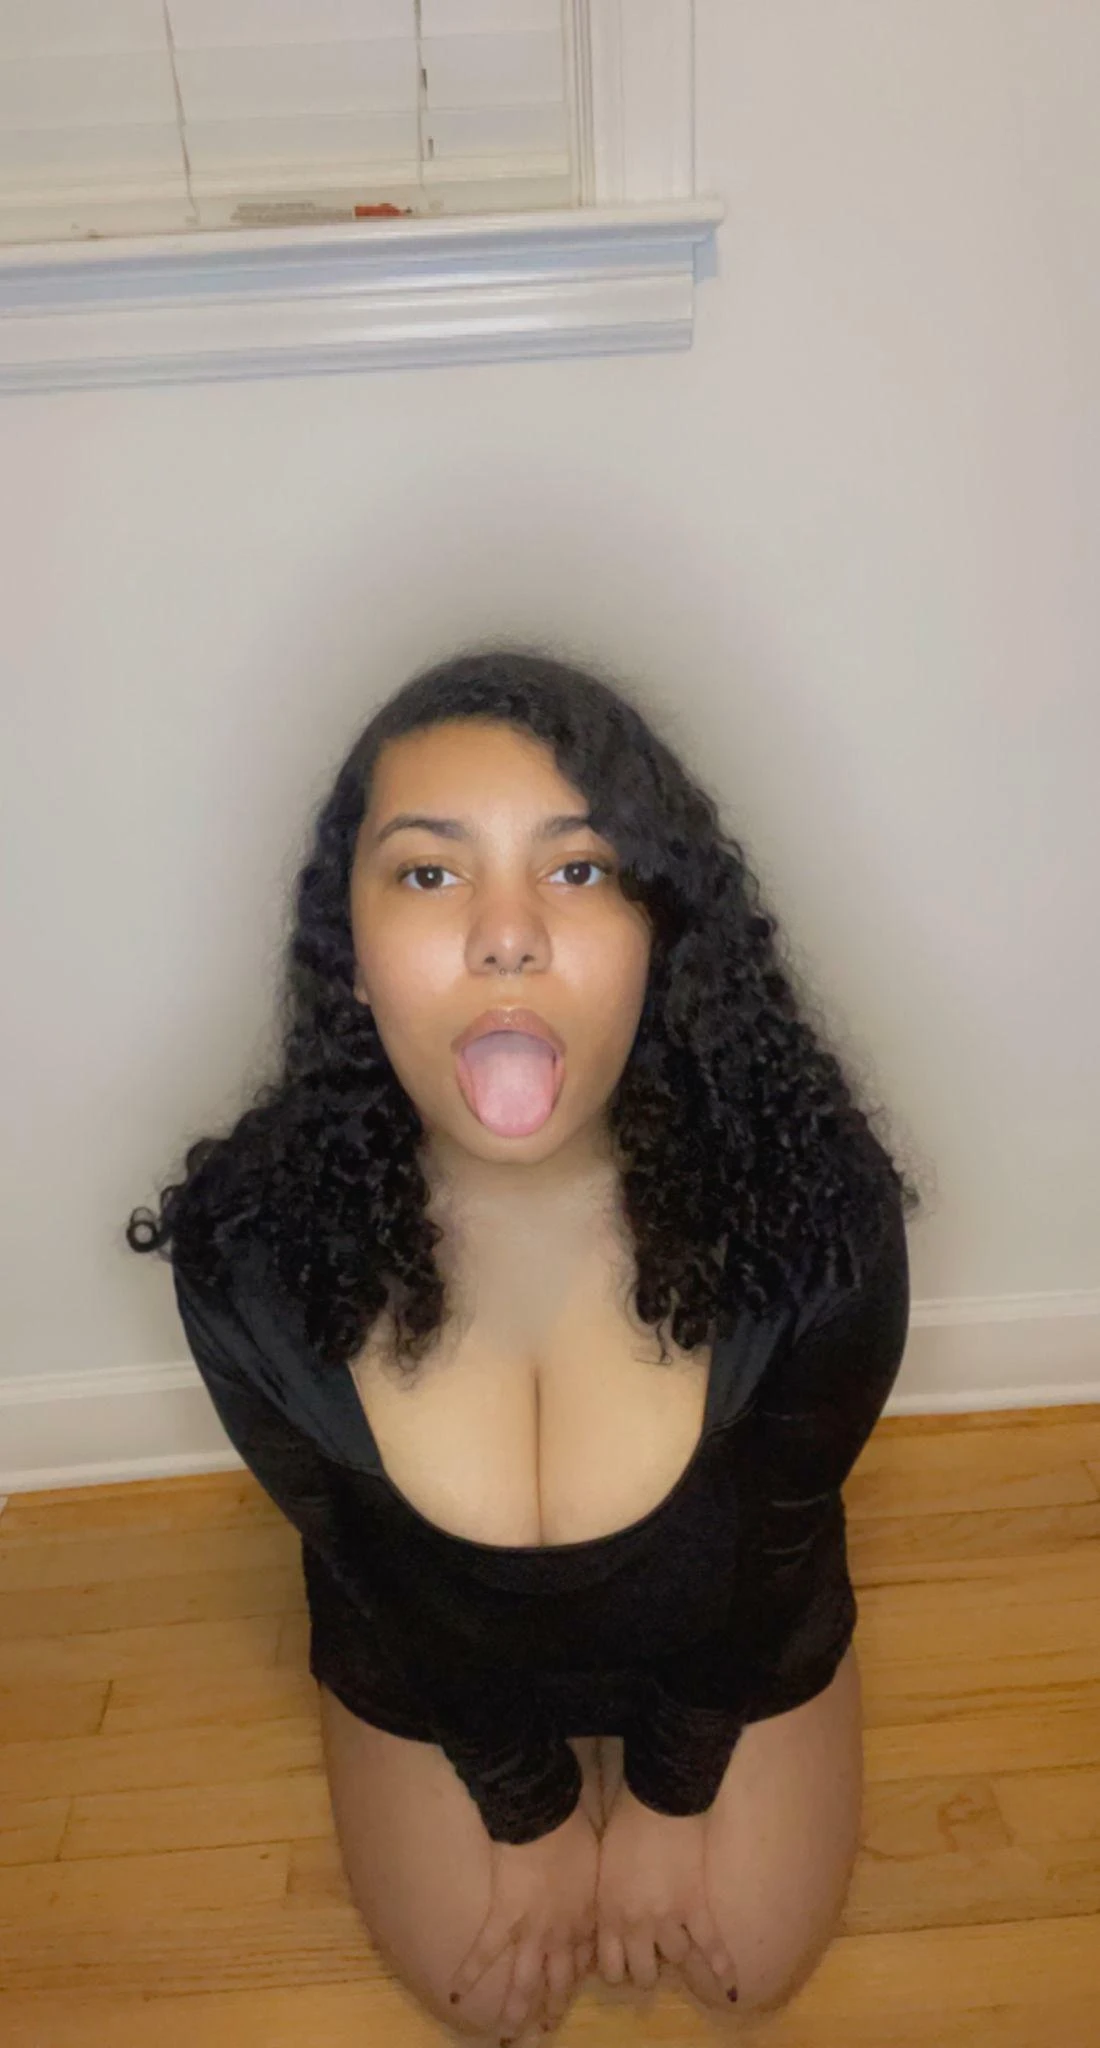 Mouth or tits